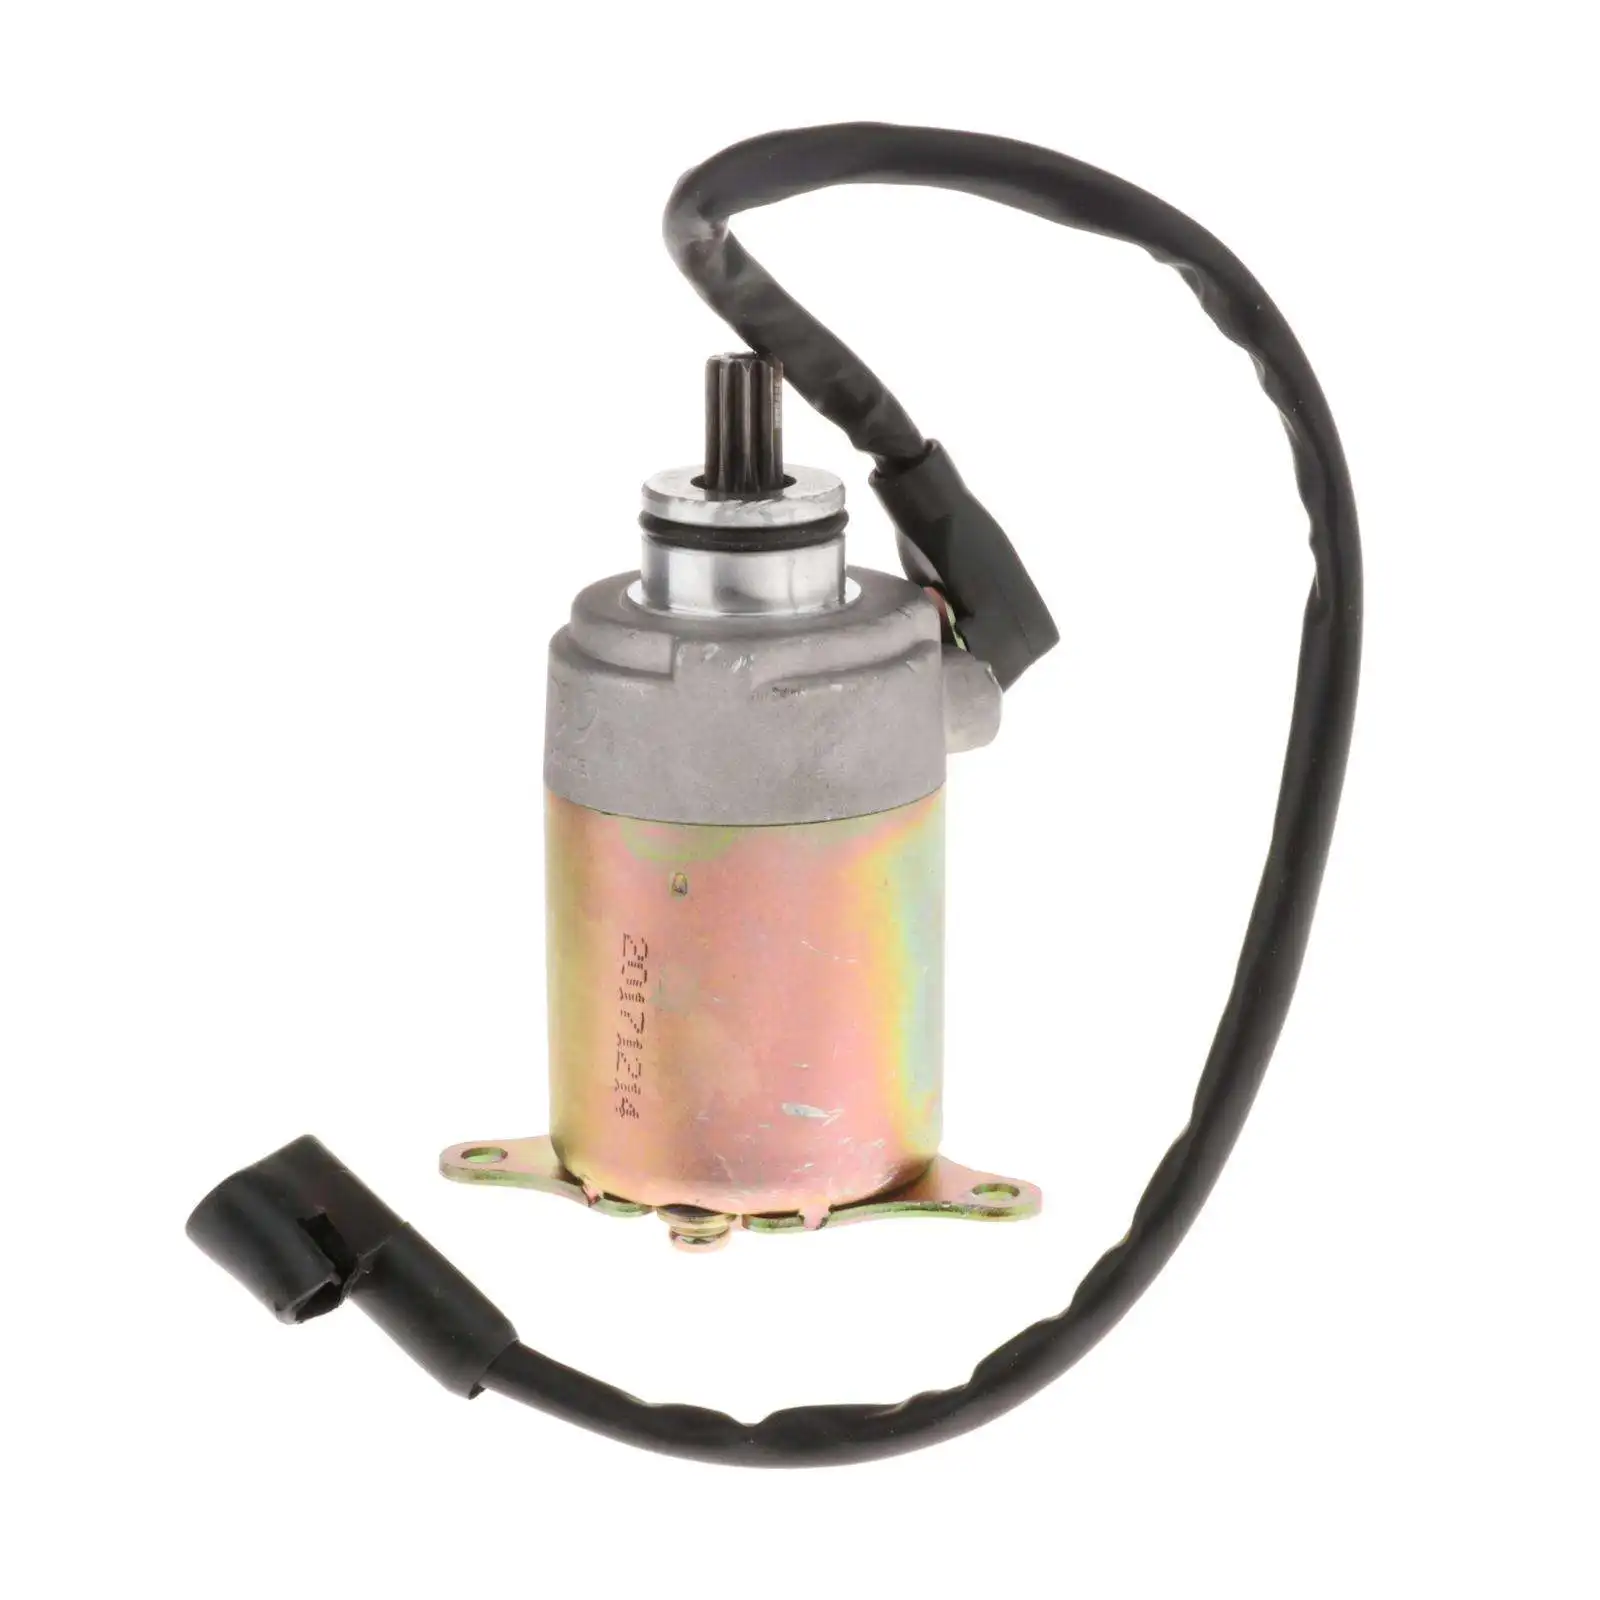 Professional 9T Electric Start Starter Motor for GY6 150cc Engine  Buggy